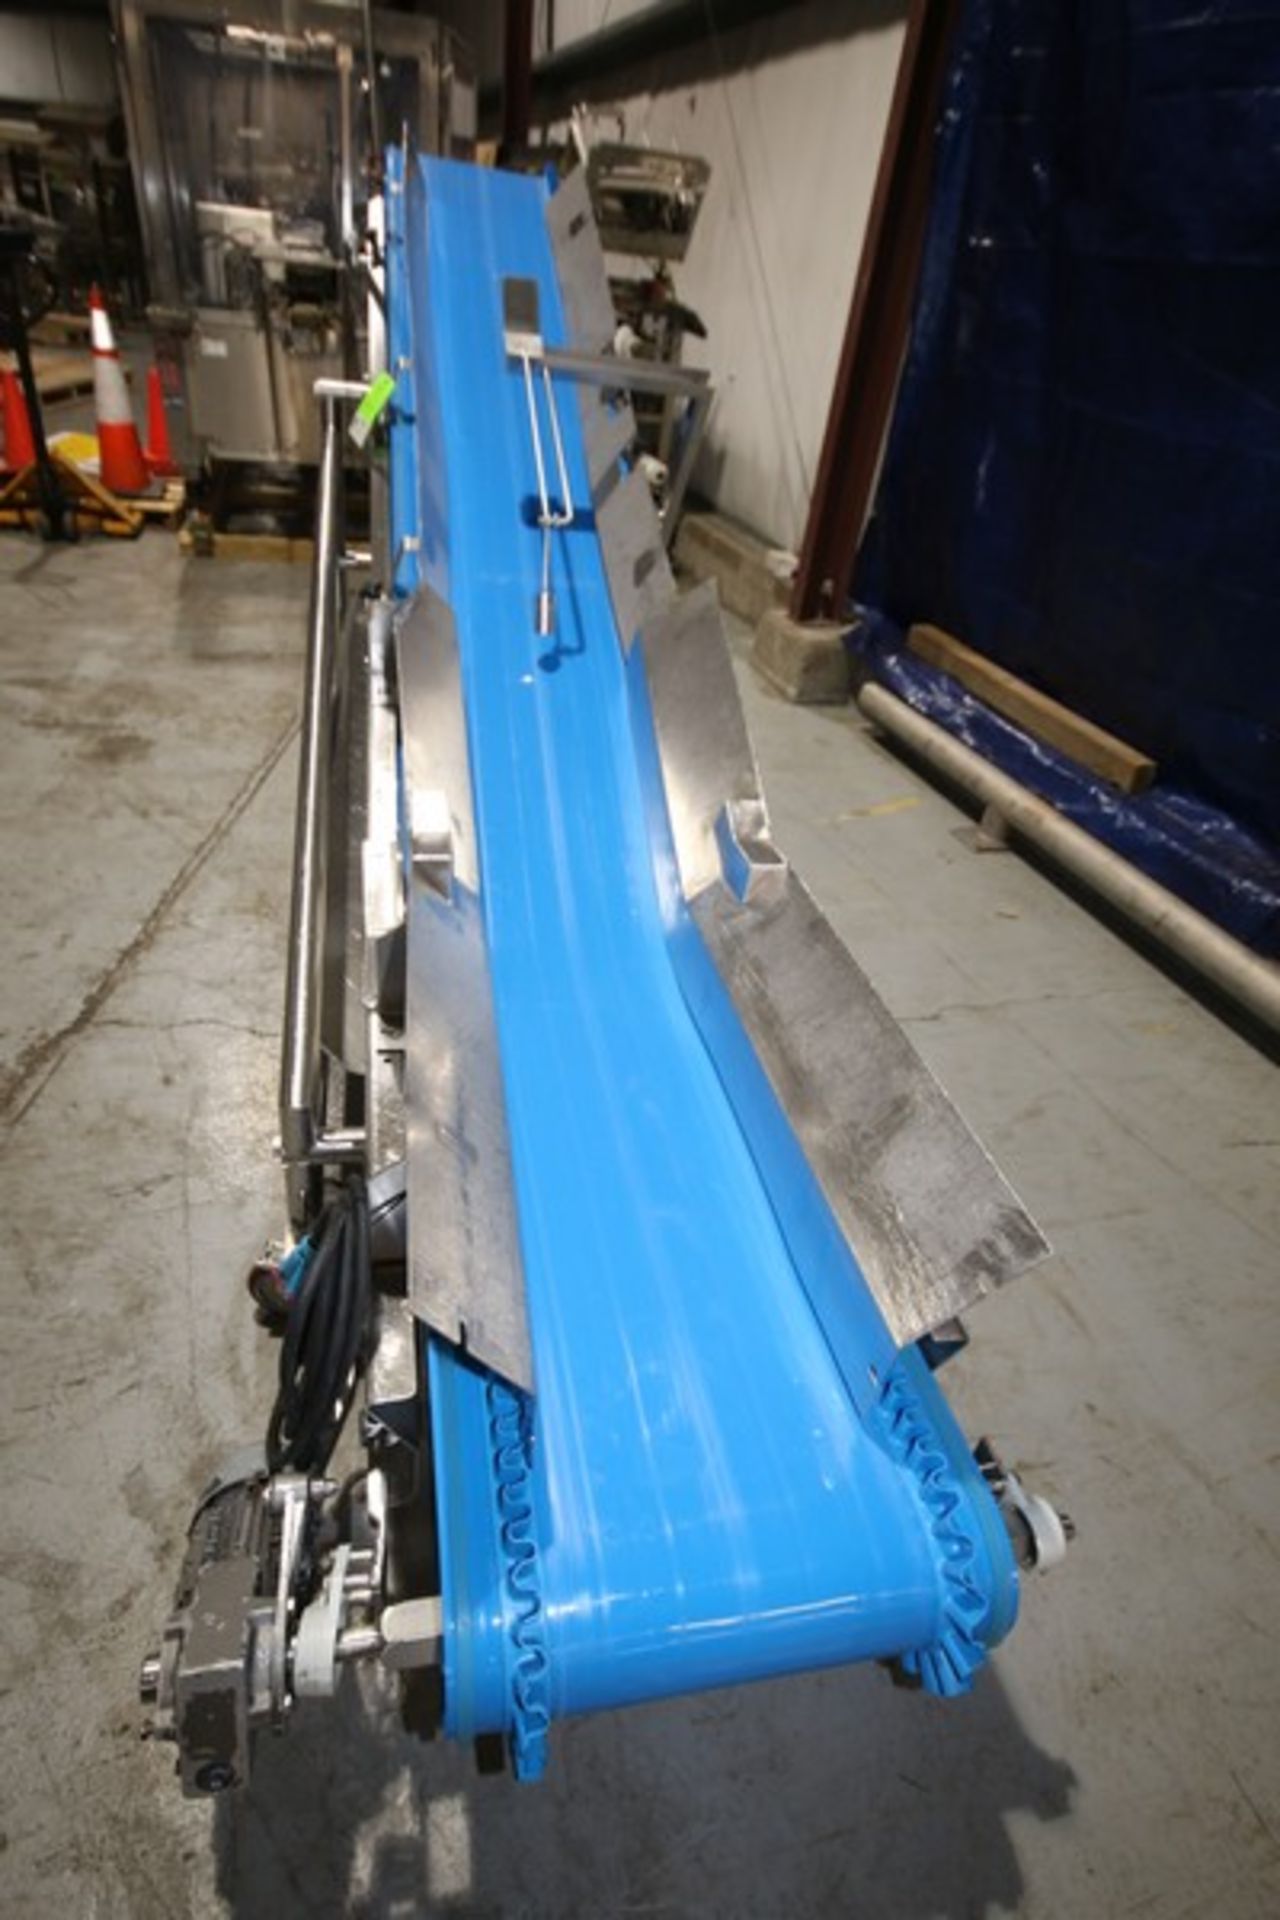 Aprox. 152" L x 17" to 65" H Portable S/S Belt Conveyor with 15" W Belt, Nord Drive Motor, S/S Sides - Image 2 of 5